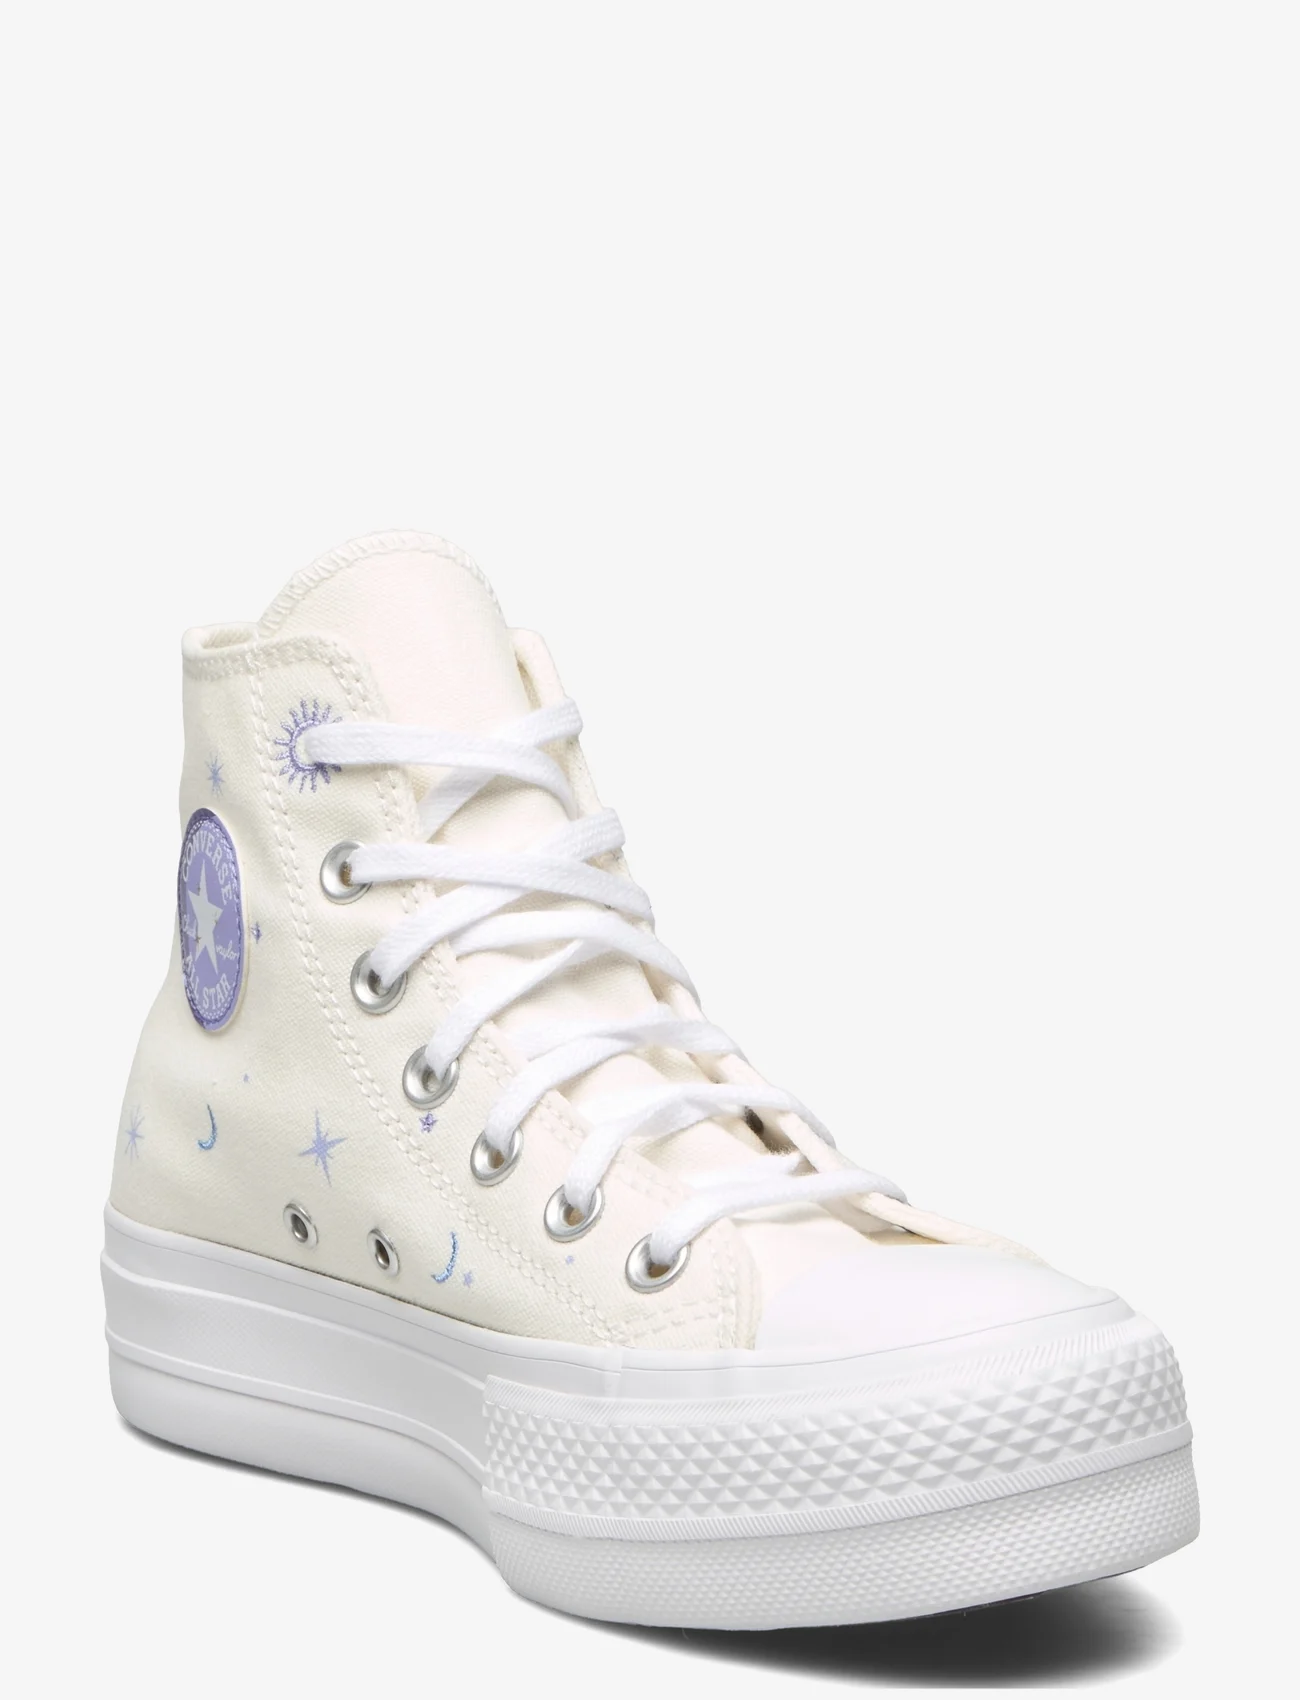 Converse Chuck Taylor All Star Lift - High top sneakers 